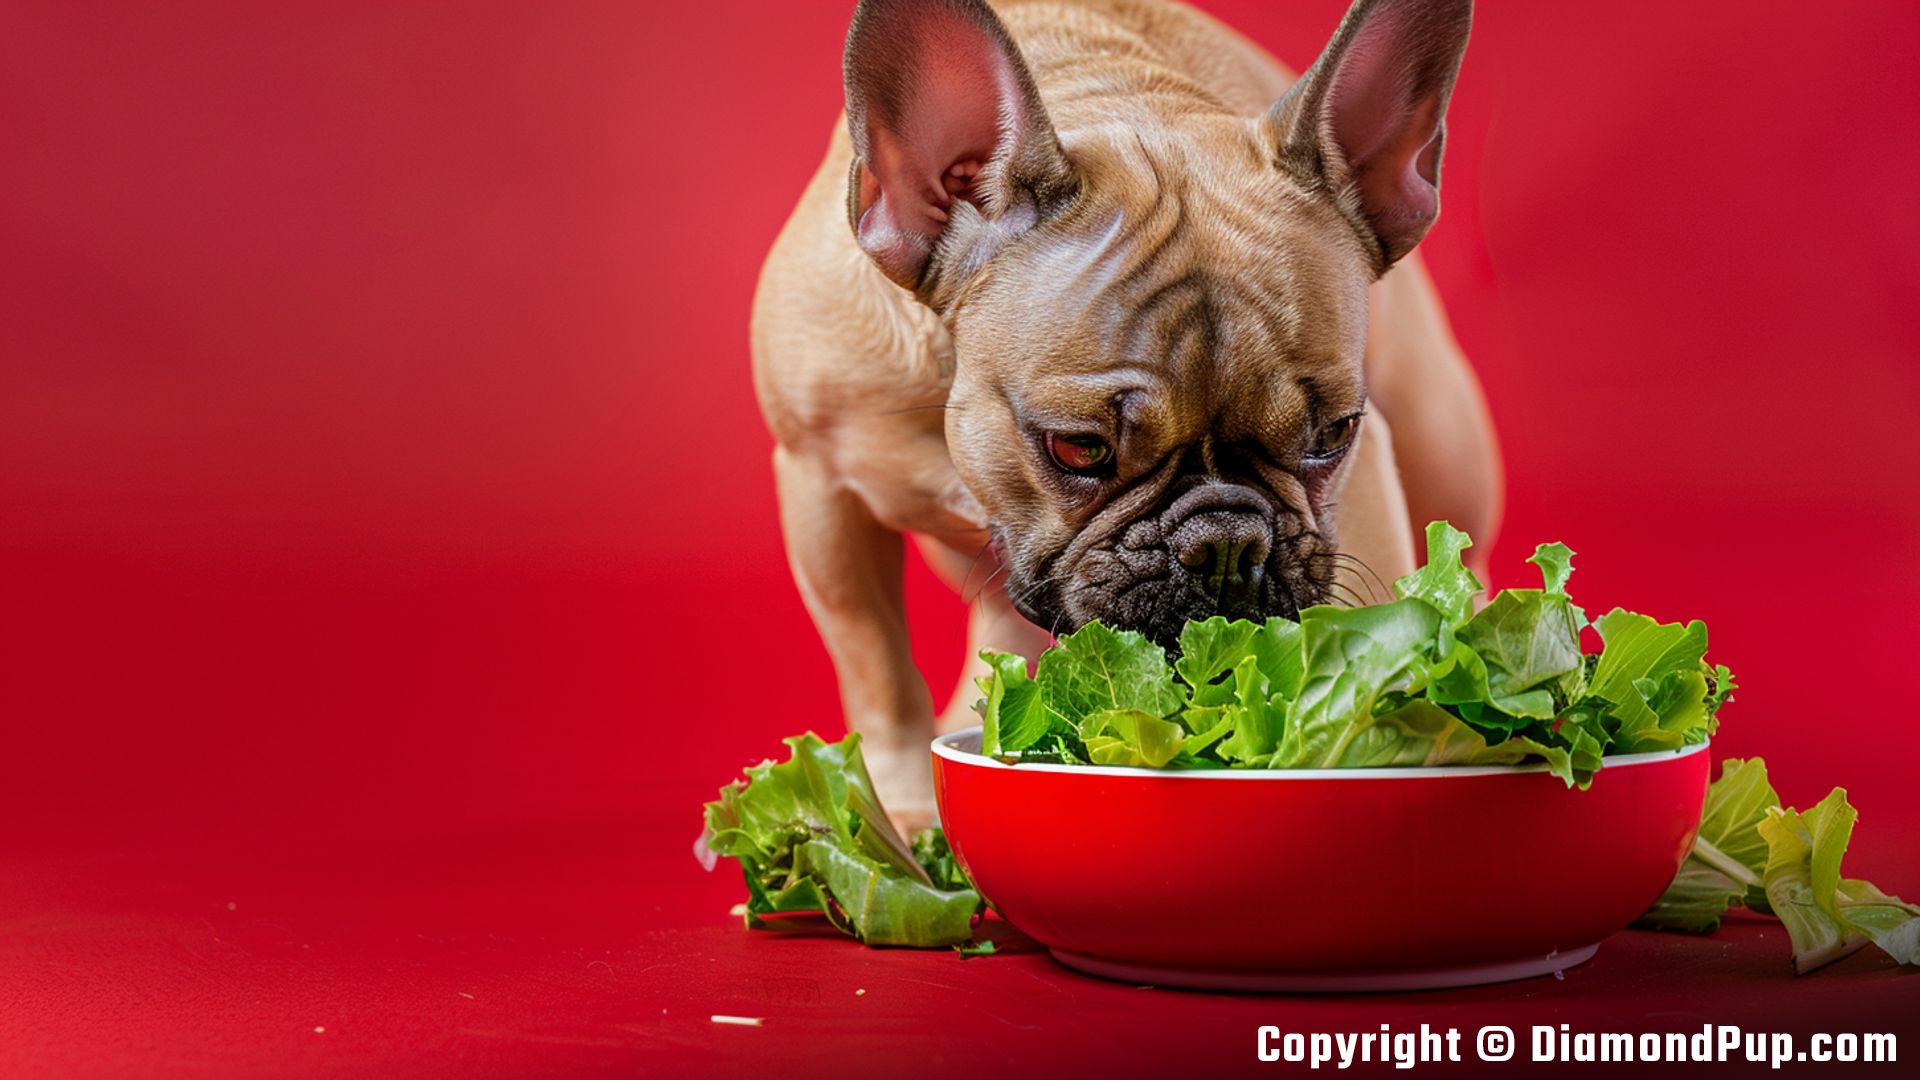 Photo of an Adorable French Bulldog Eating Lettuce